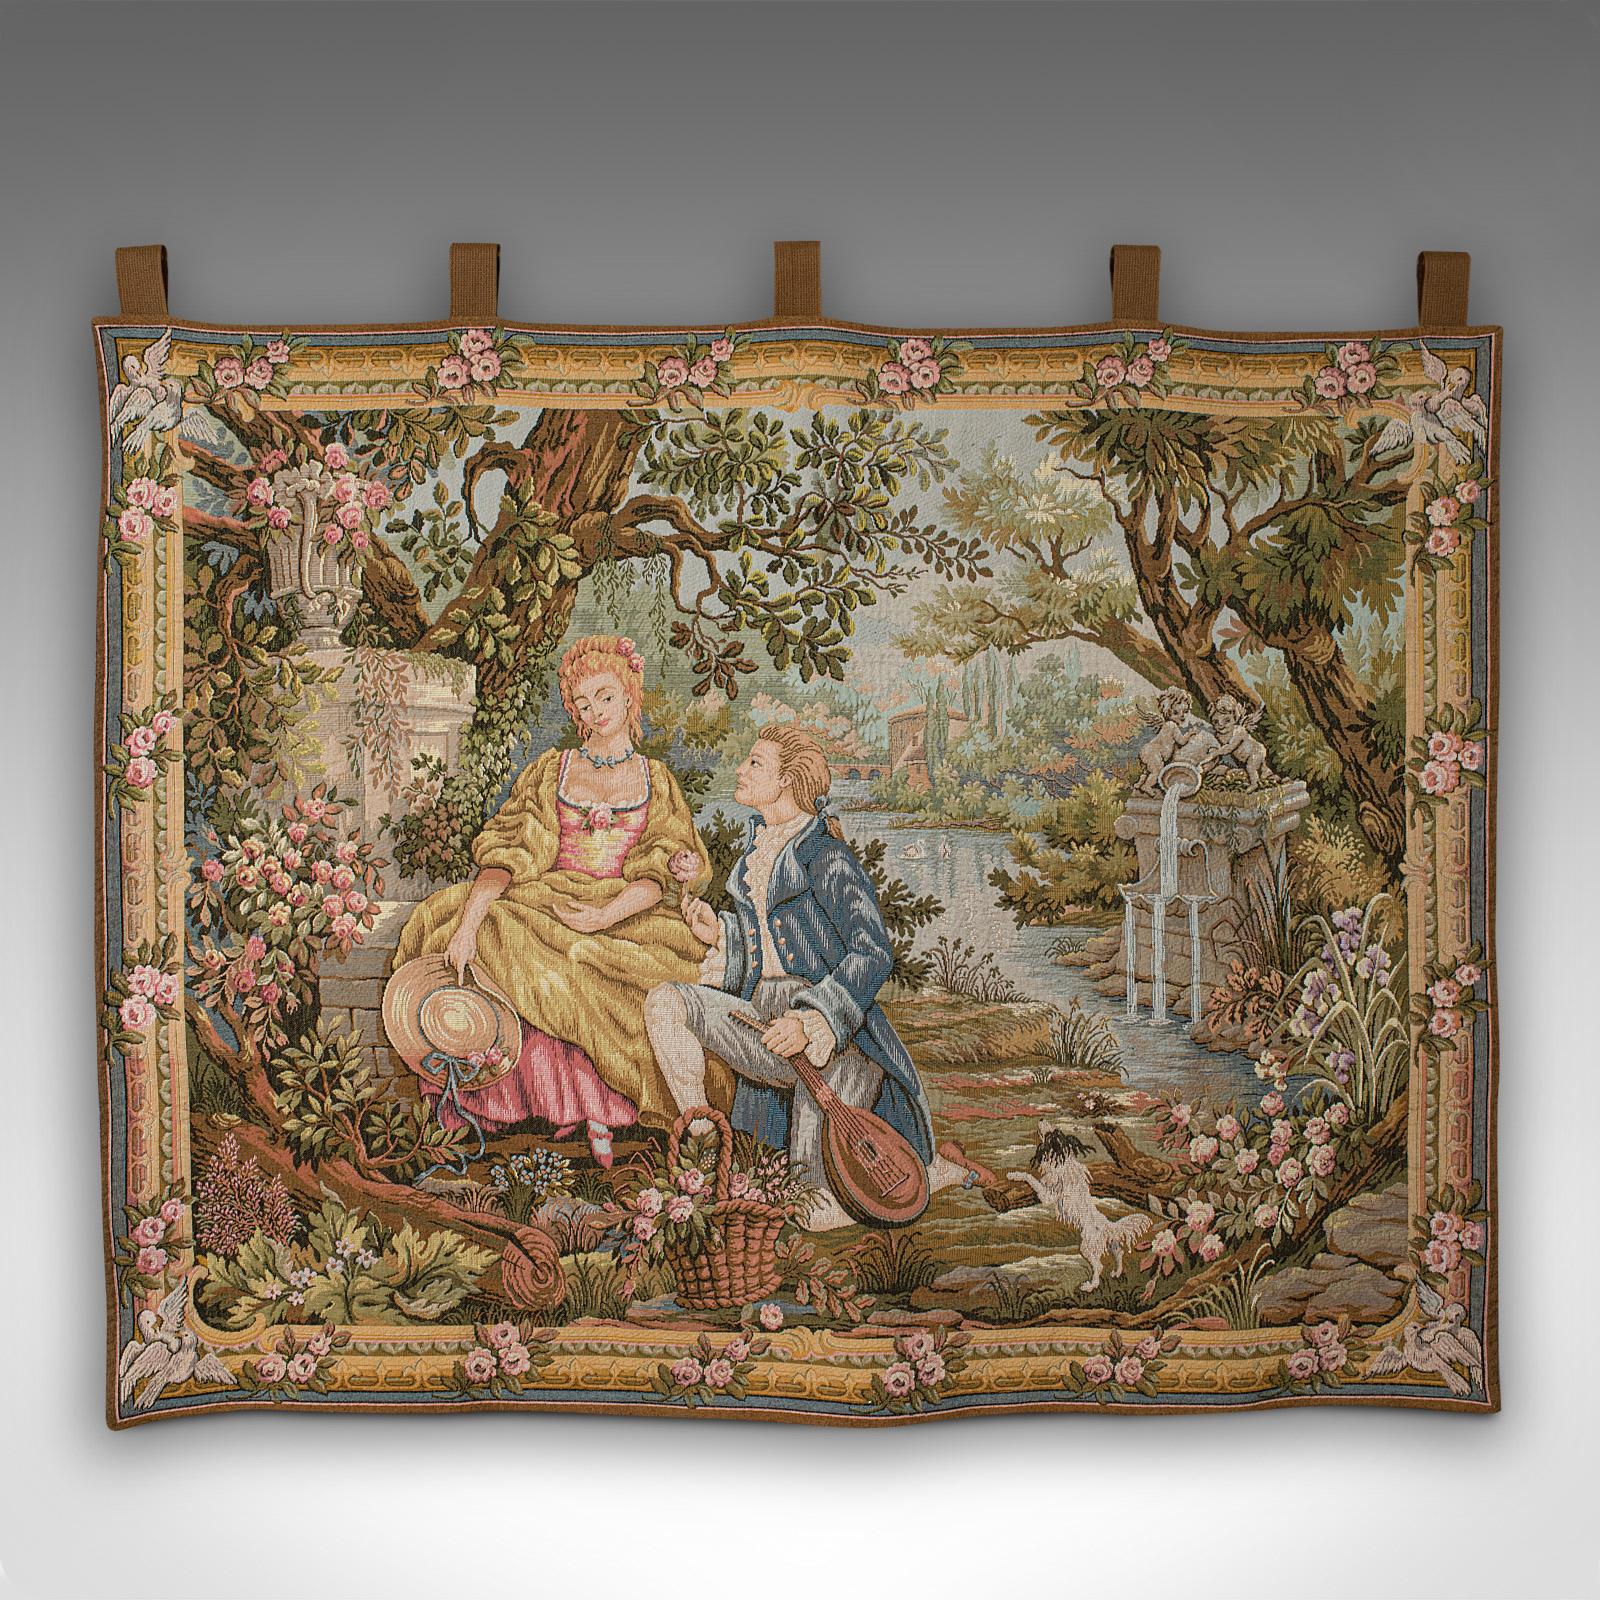 This is a vintage romance tapestry. A French, needlepoint decorative panel by Marc Waymel, dated to rear 1987.

Classically appealing continental scene with great colour
Displays a desirable aged patina and in good order
Quality needlepoint with